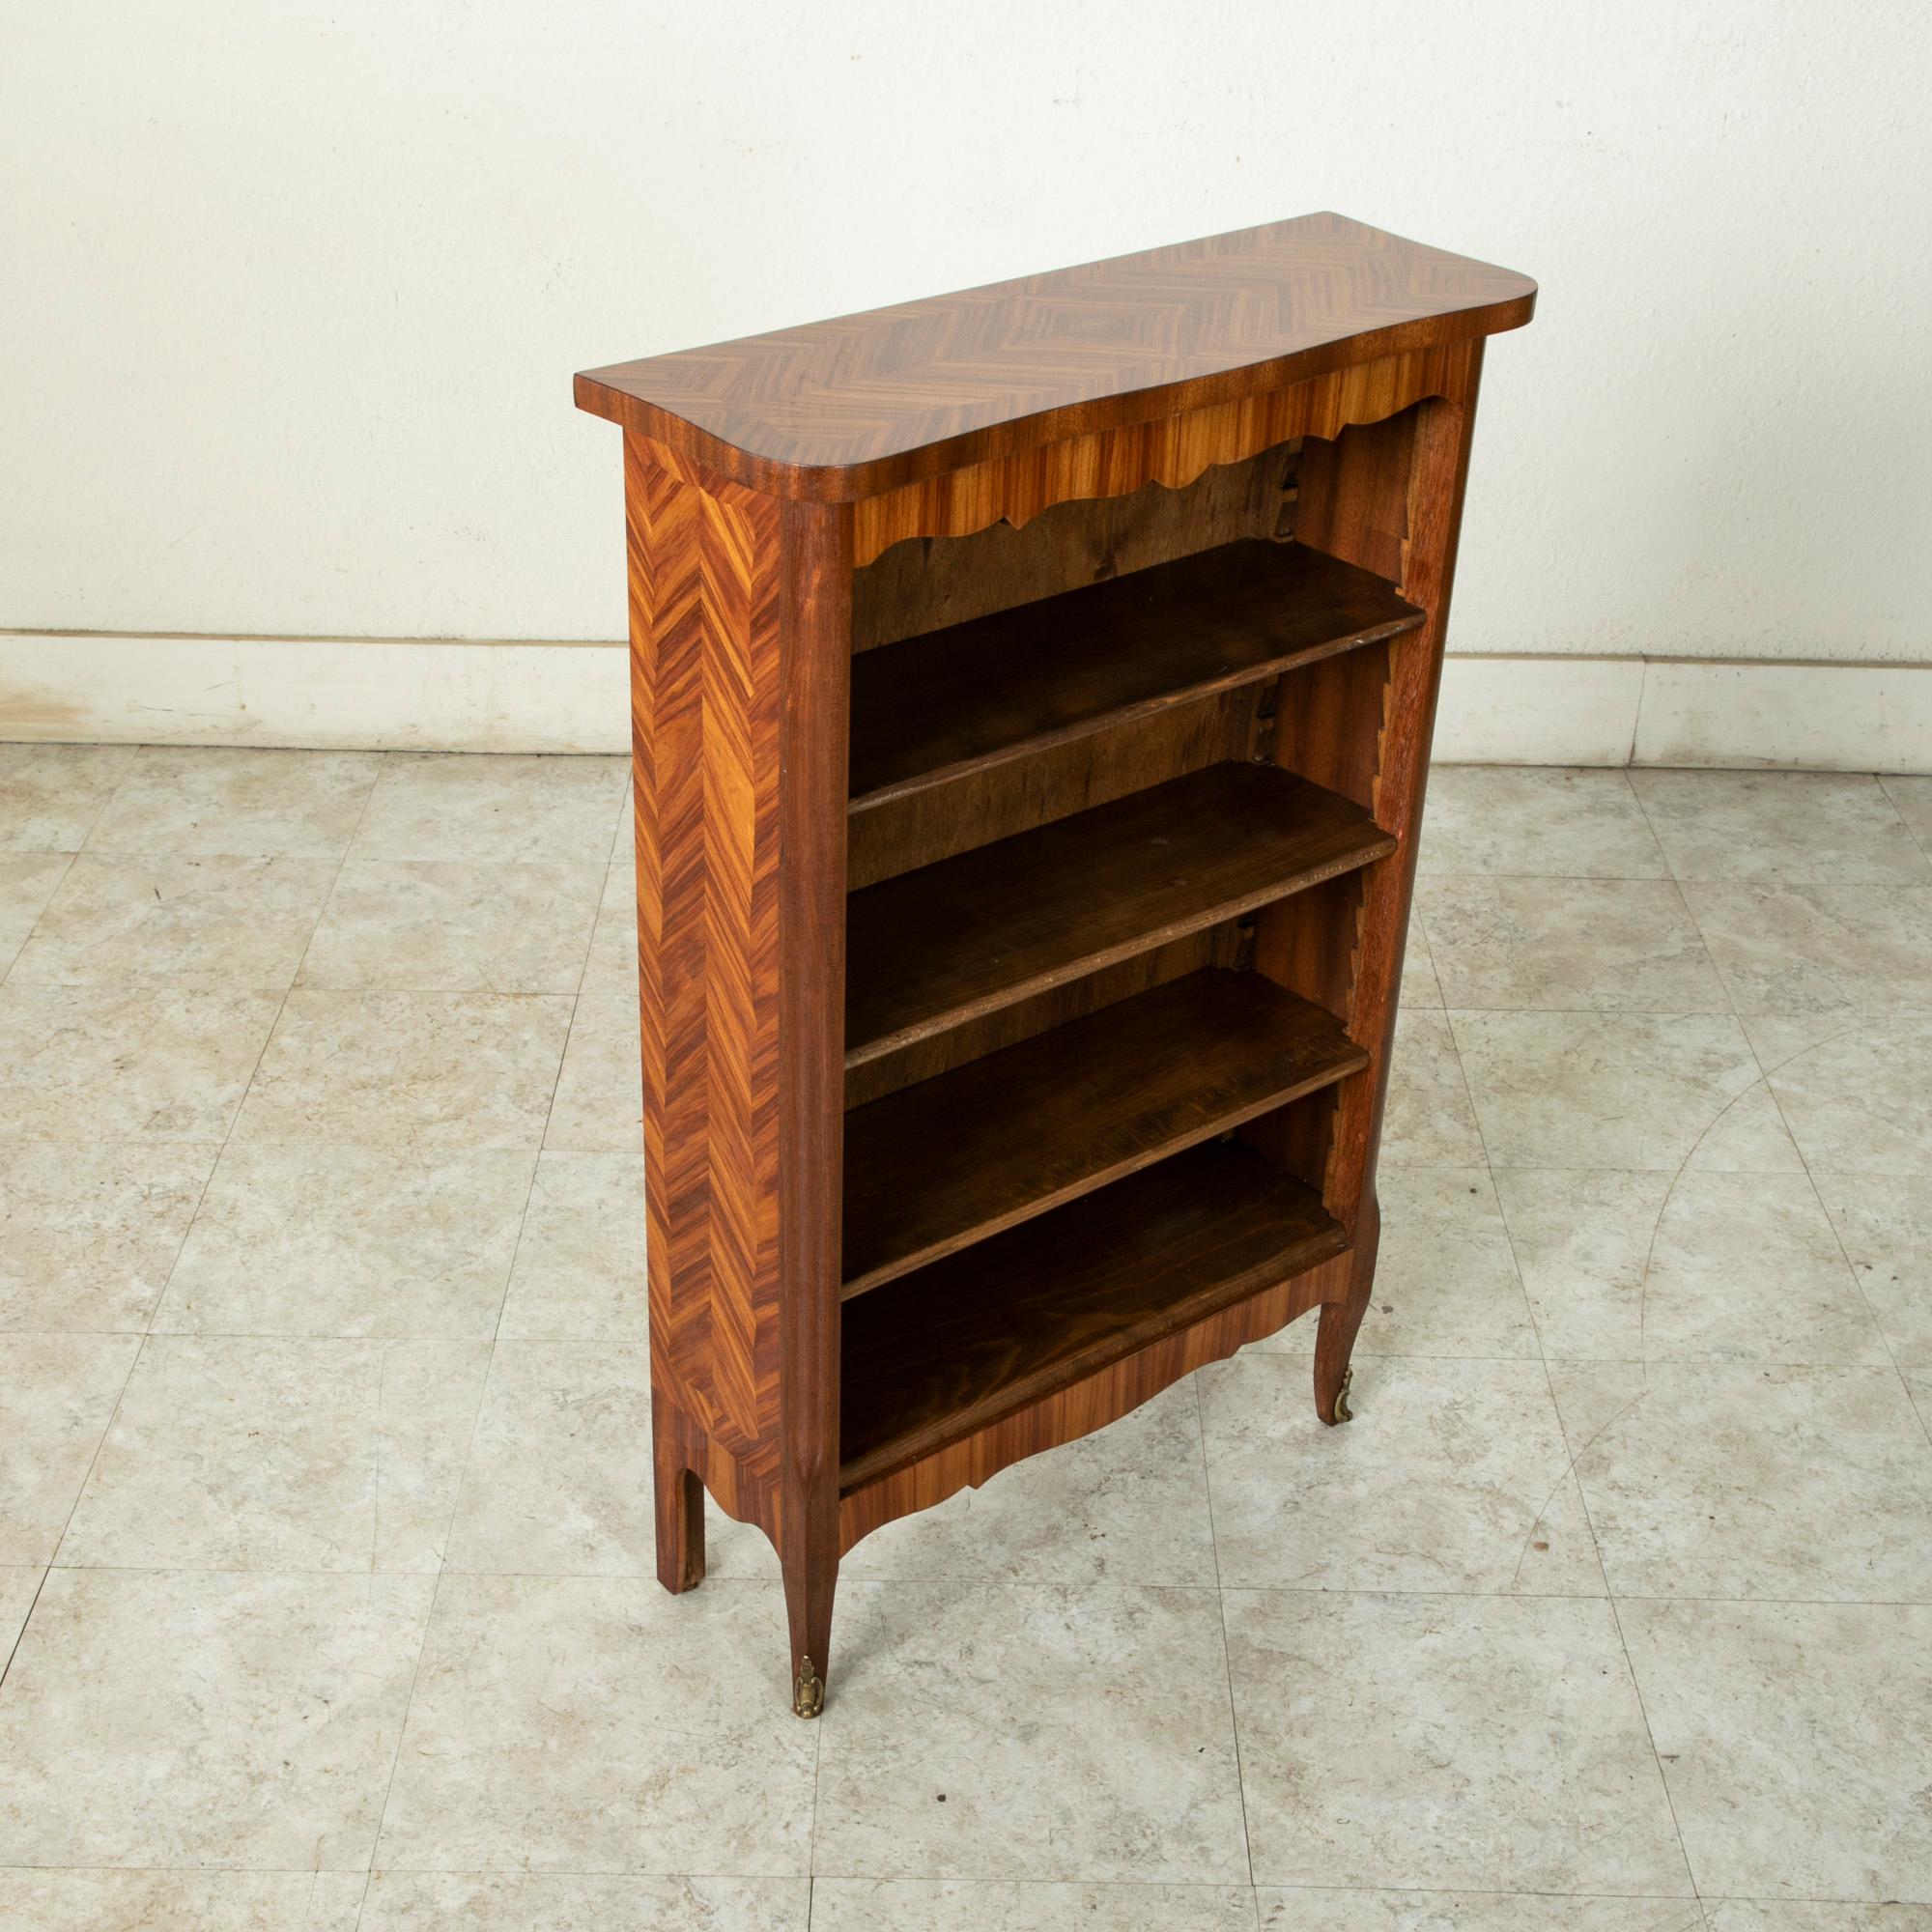 Inlay Small Scale Early 20th Century French Transition Style Inlaid Rosewood Bookshelf